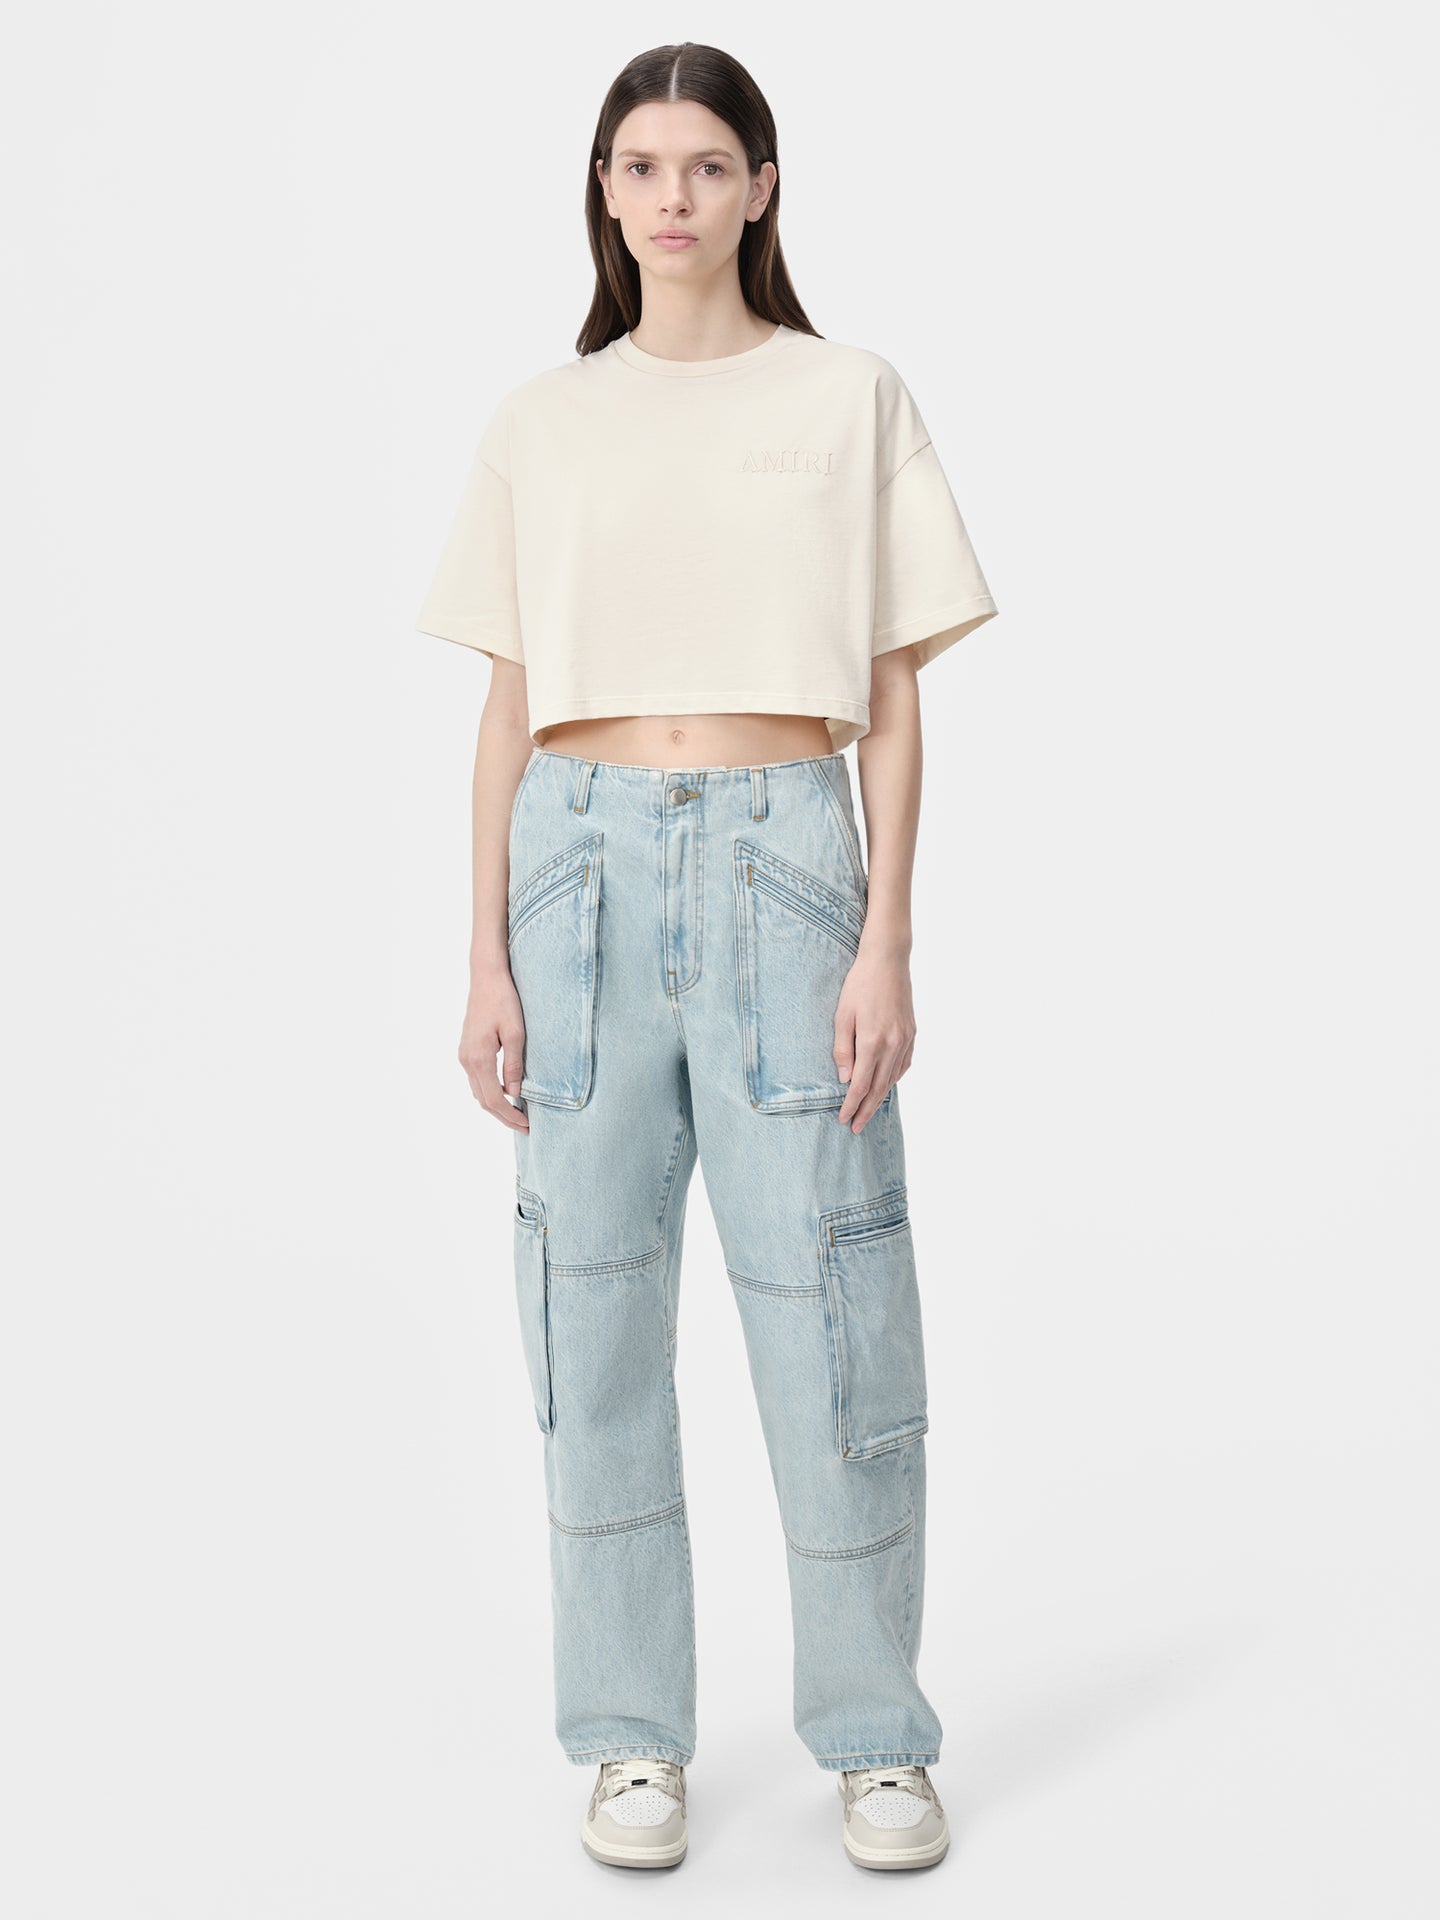 WOMEN - AMIRI EMBROIDERED CROPPED TEE - Alabaster